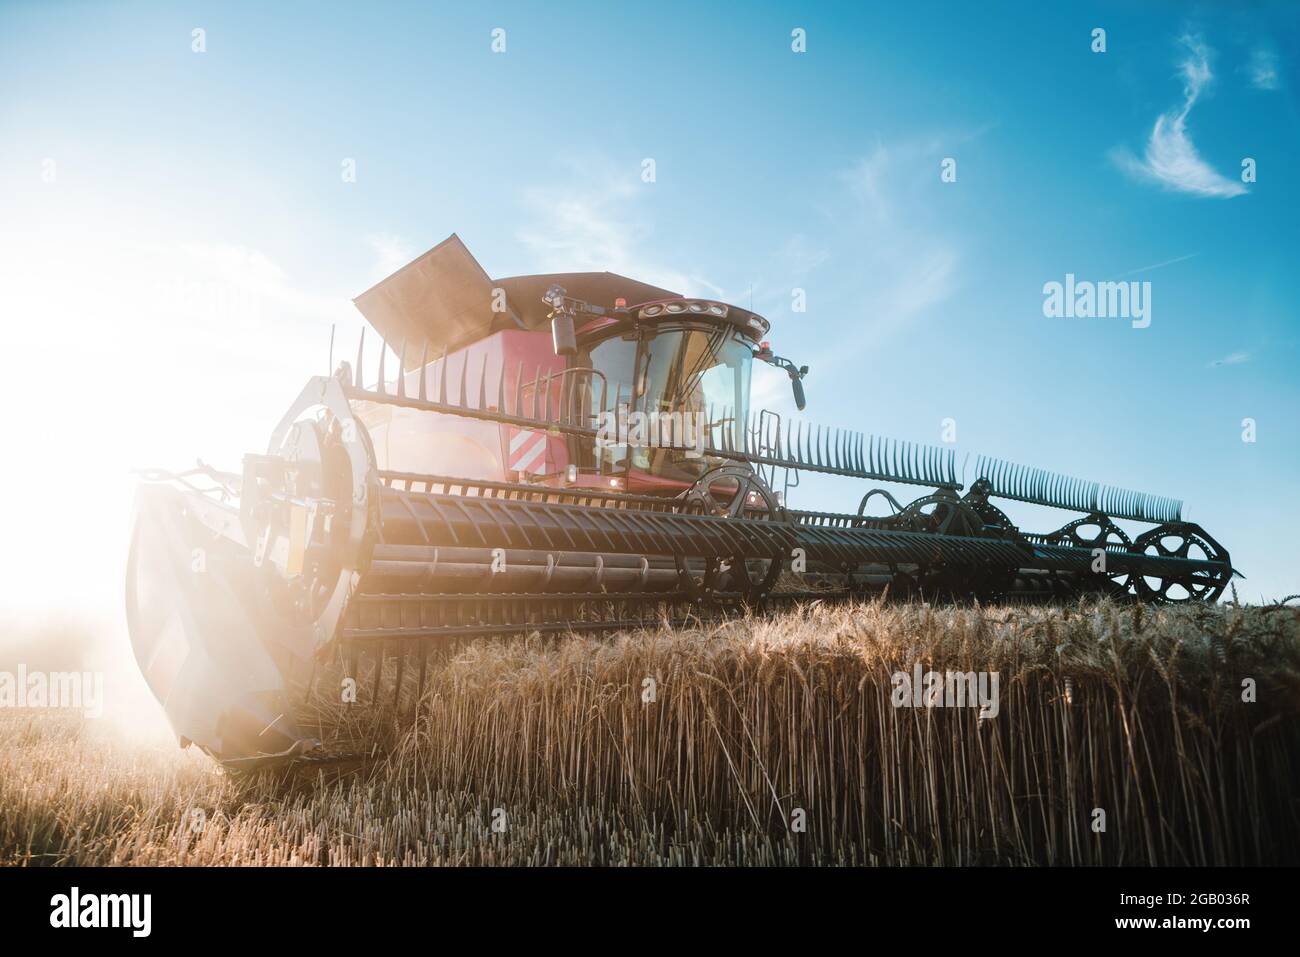 Combine harvester on grain field during harvest time Stock Photo